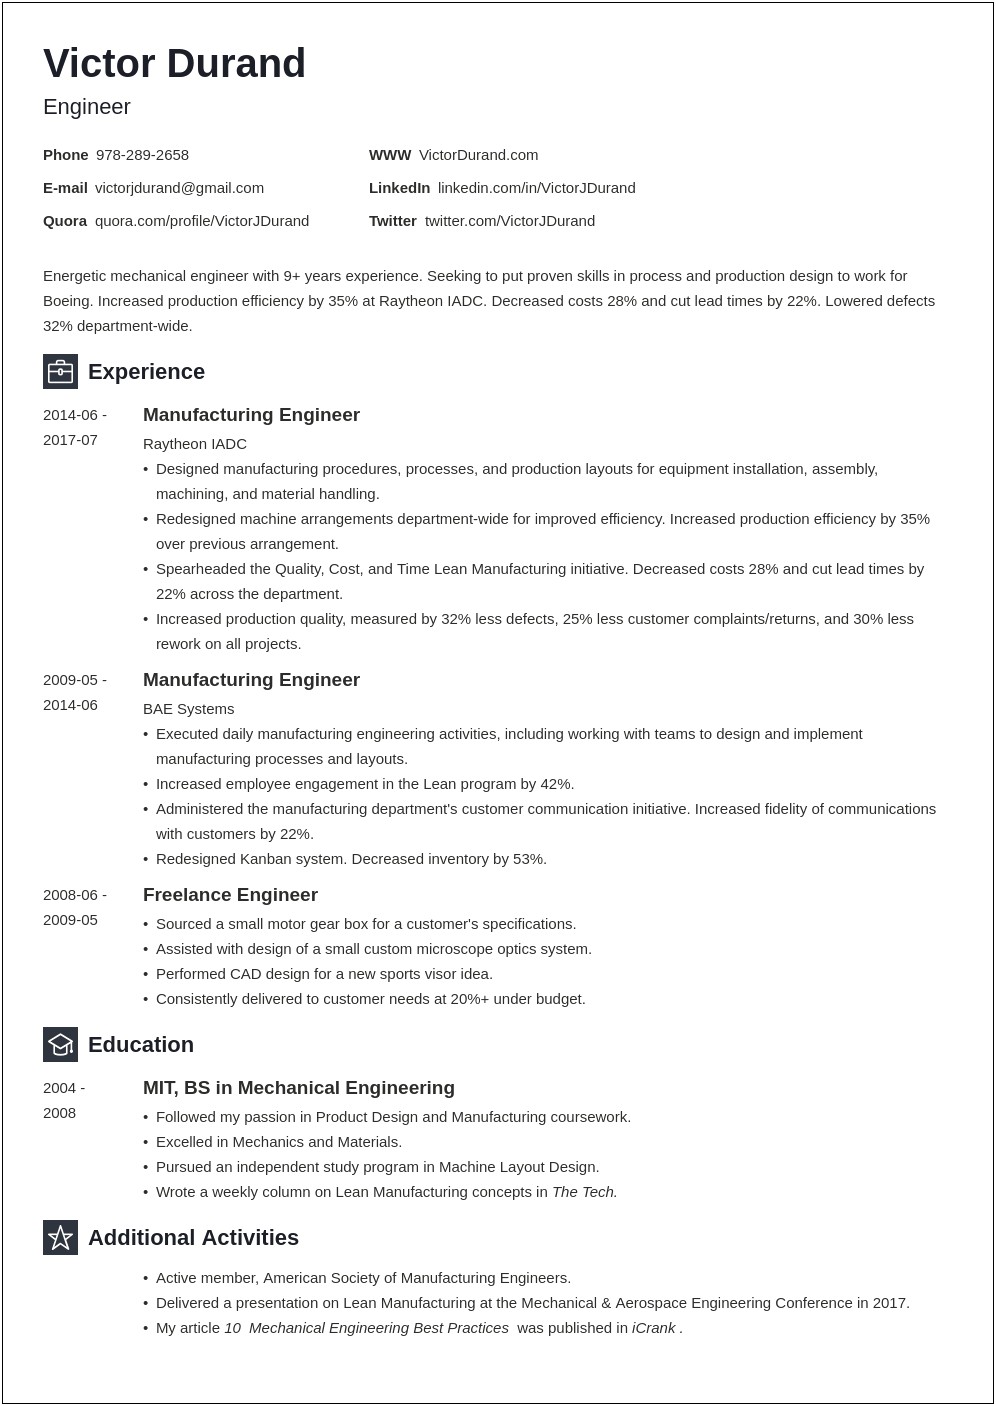 Resume Format For 3 Years Experience Engineer